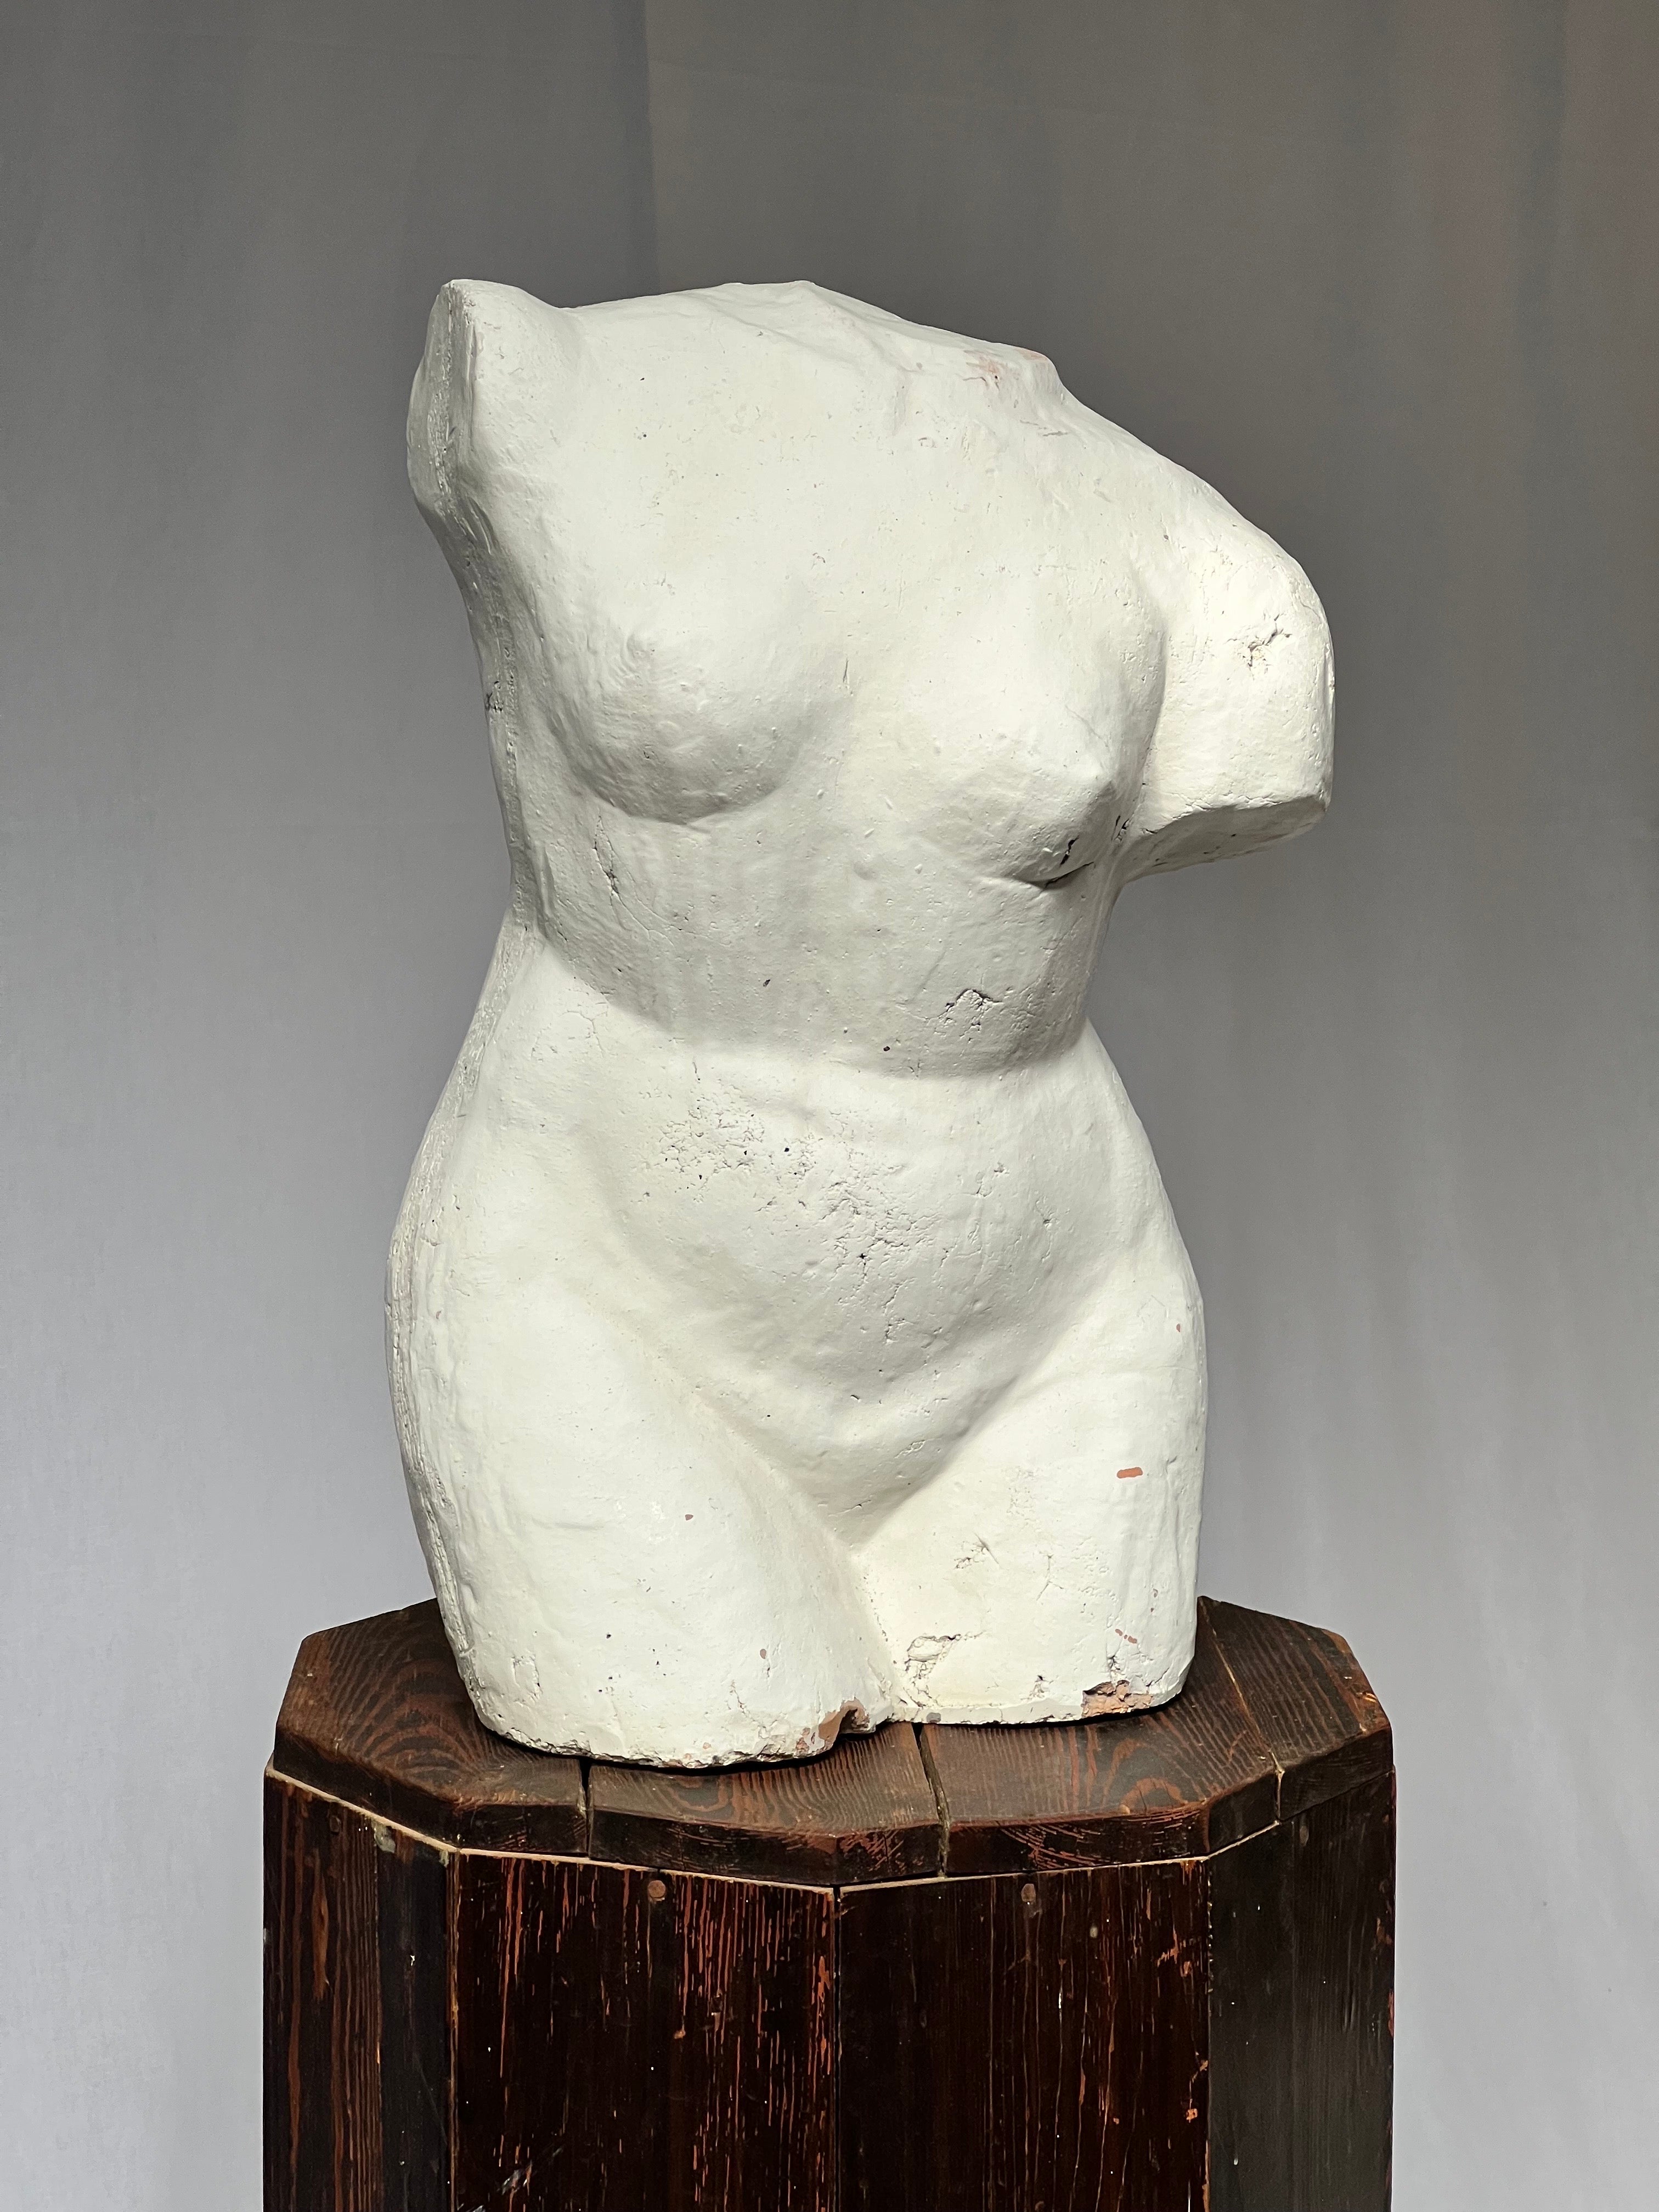 Torso of a nude women in white painted clay. It's a brutal textured with pattern and traces when it was made. White painted on top of the clay.

The pedestal is also available on another